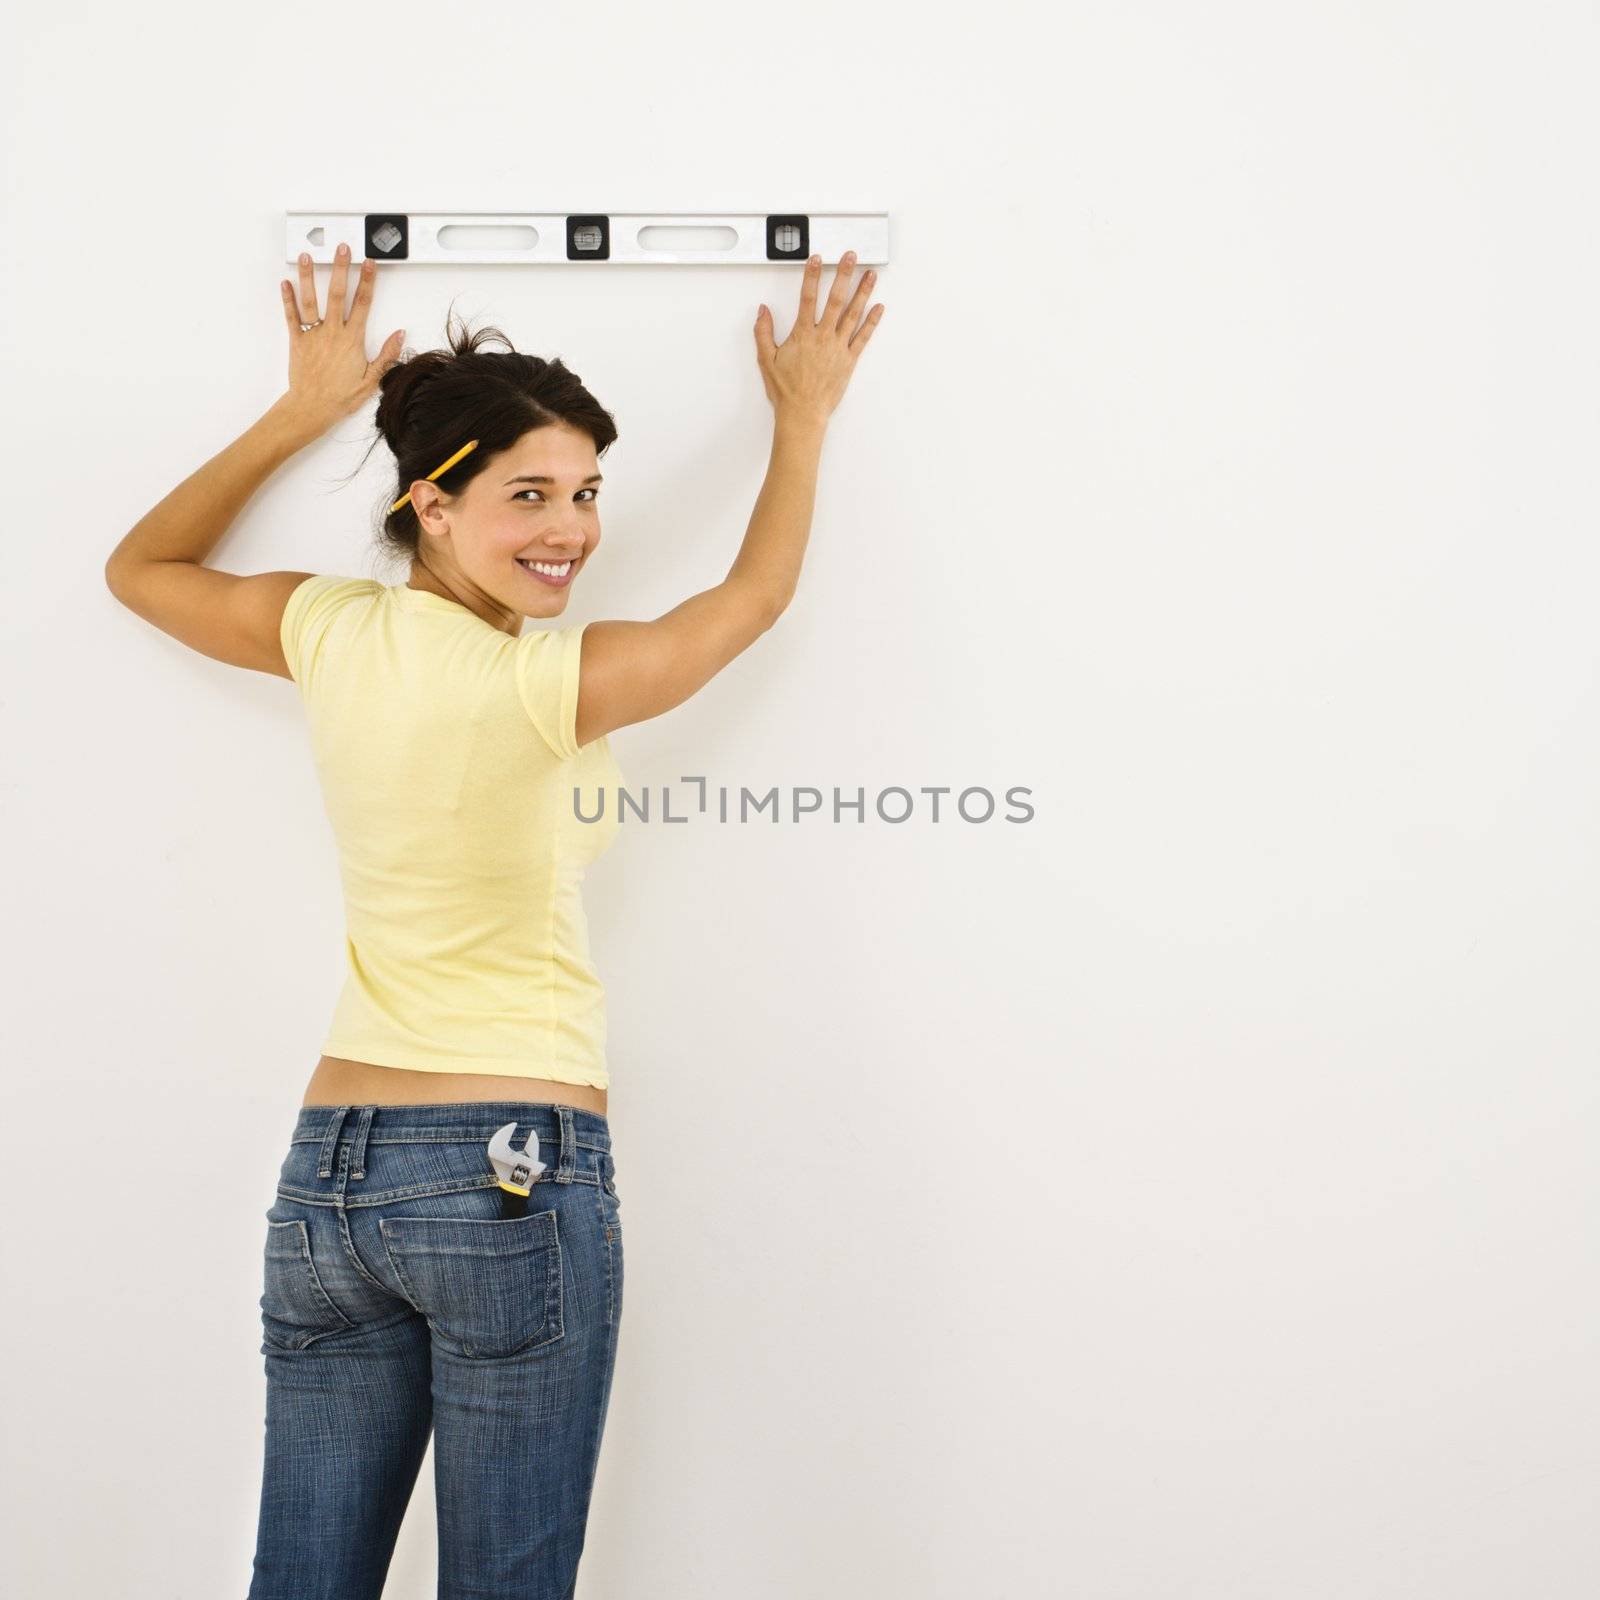 Woman standing holding level up to interior wall and smiling.